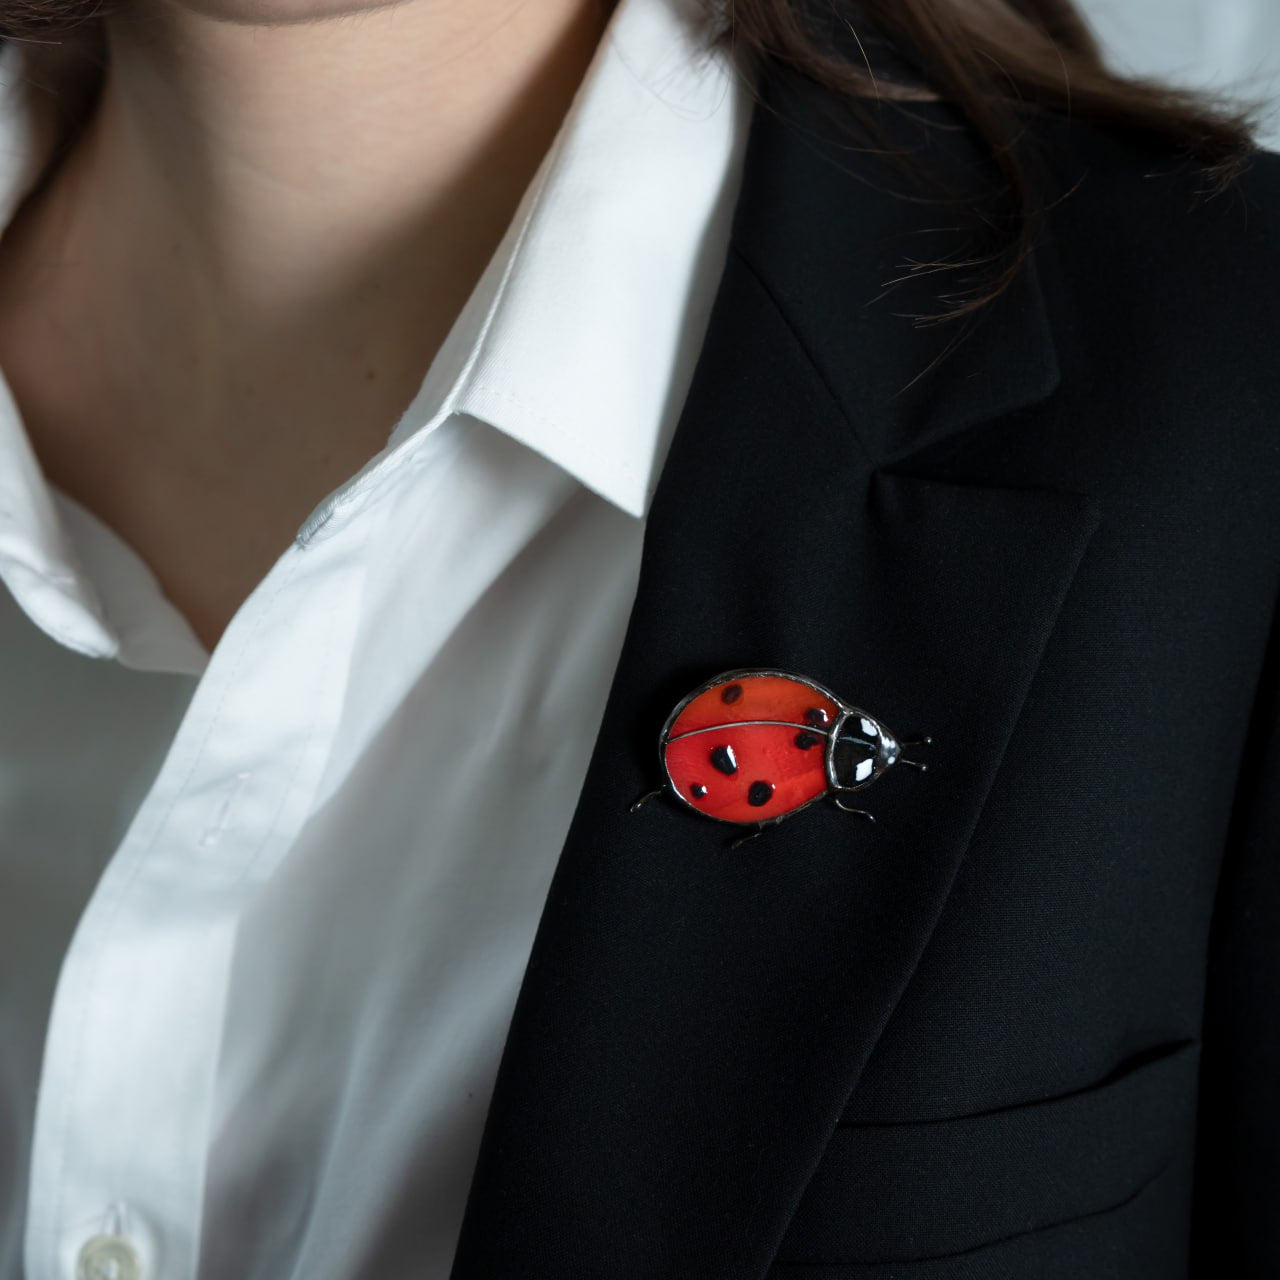 Stained glass brooch red ladybug on a black blazer